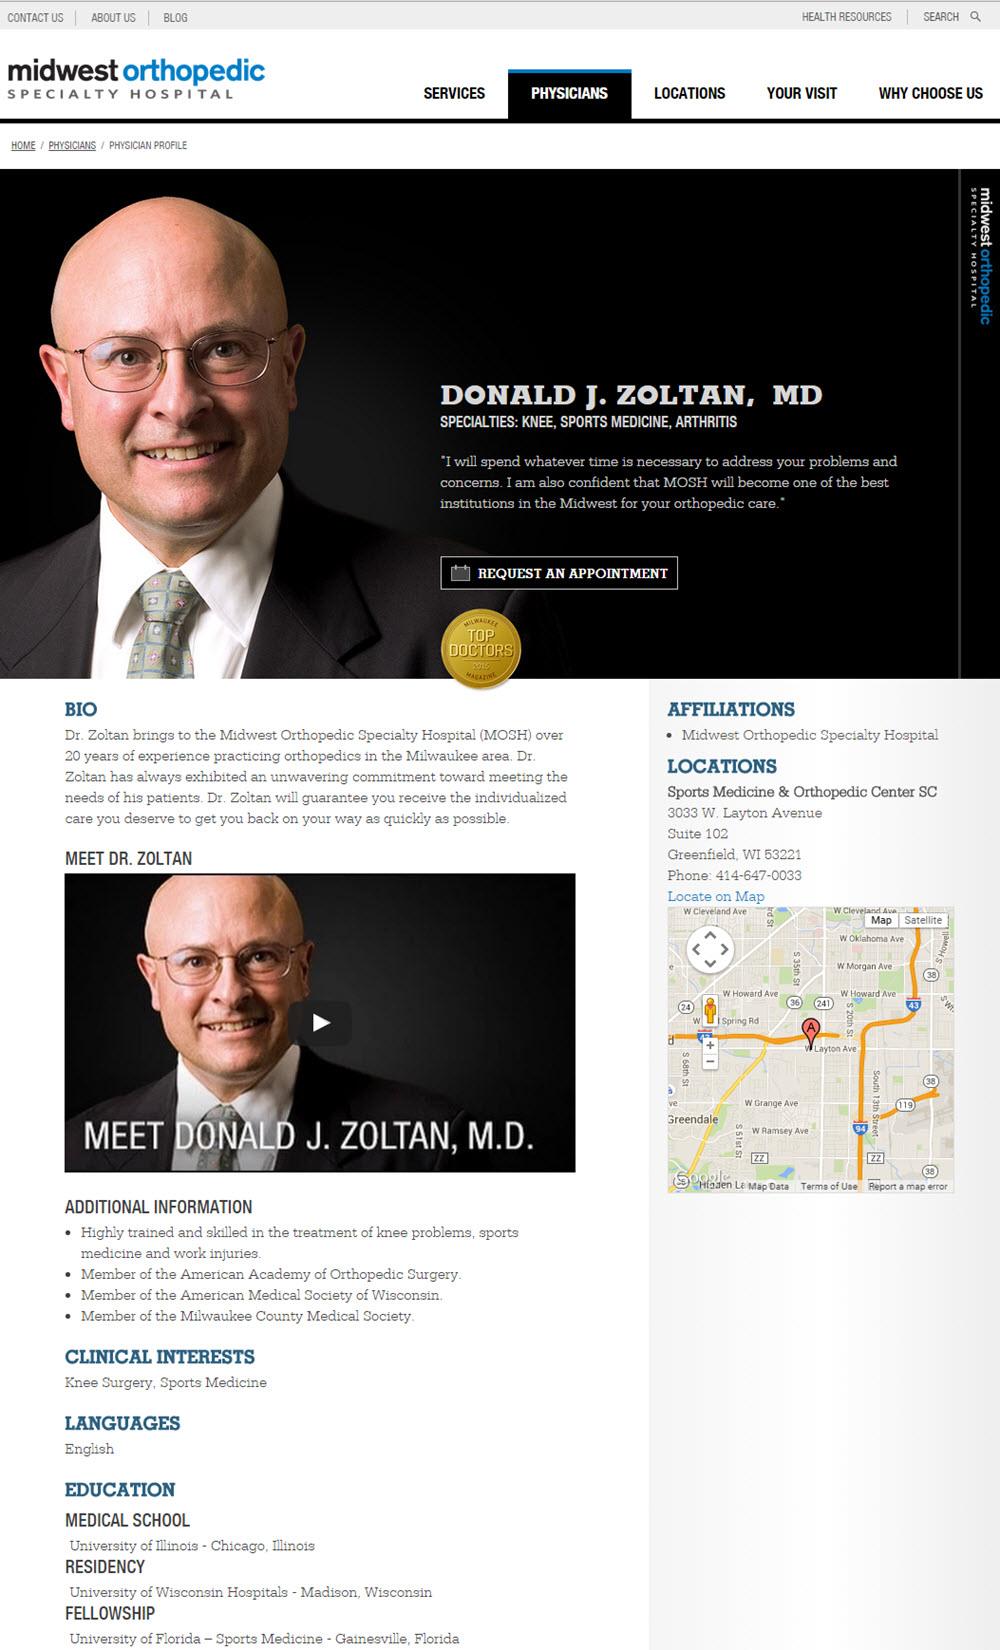 Midwest Orthopedic Specialty Hospital Provider Profile